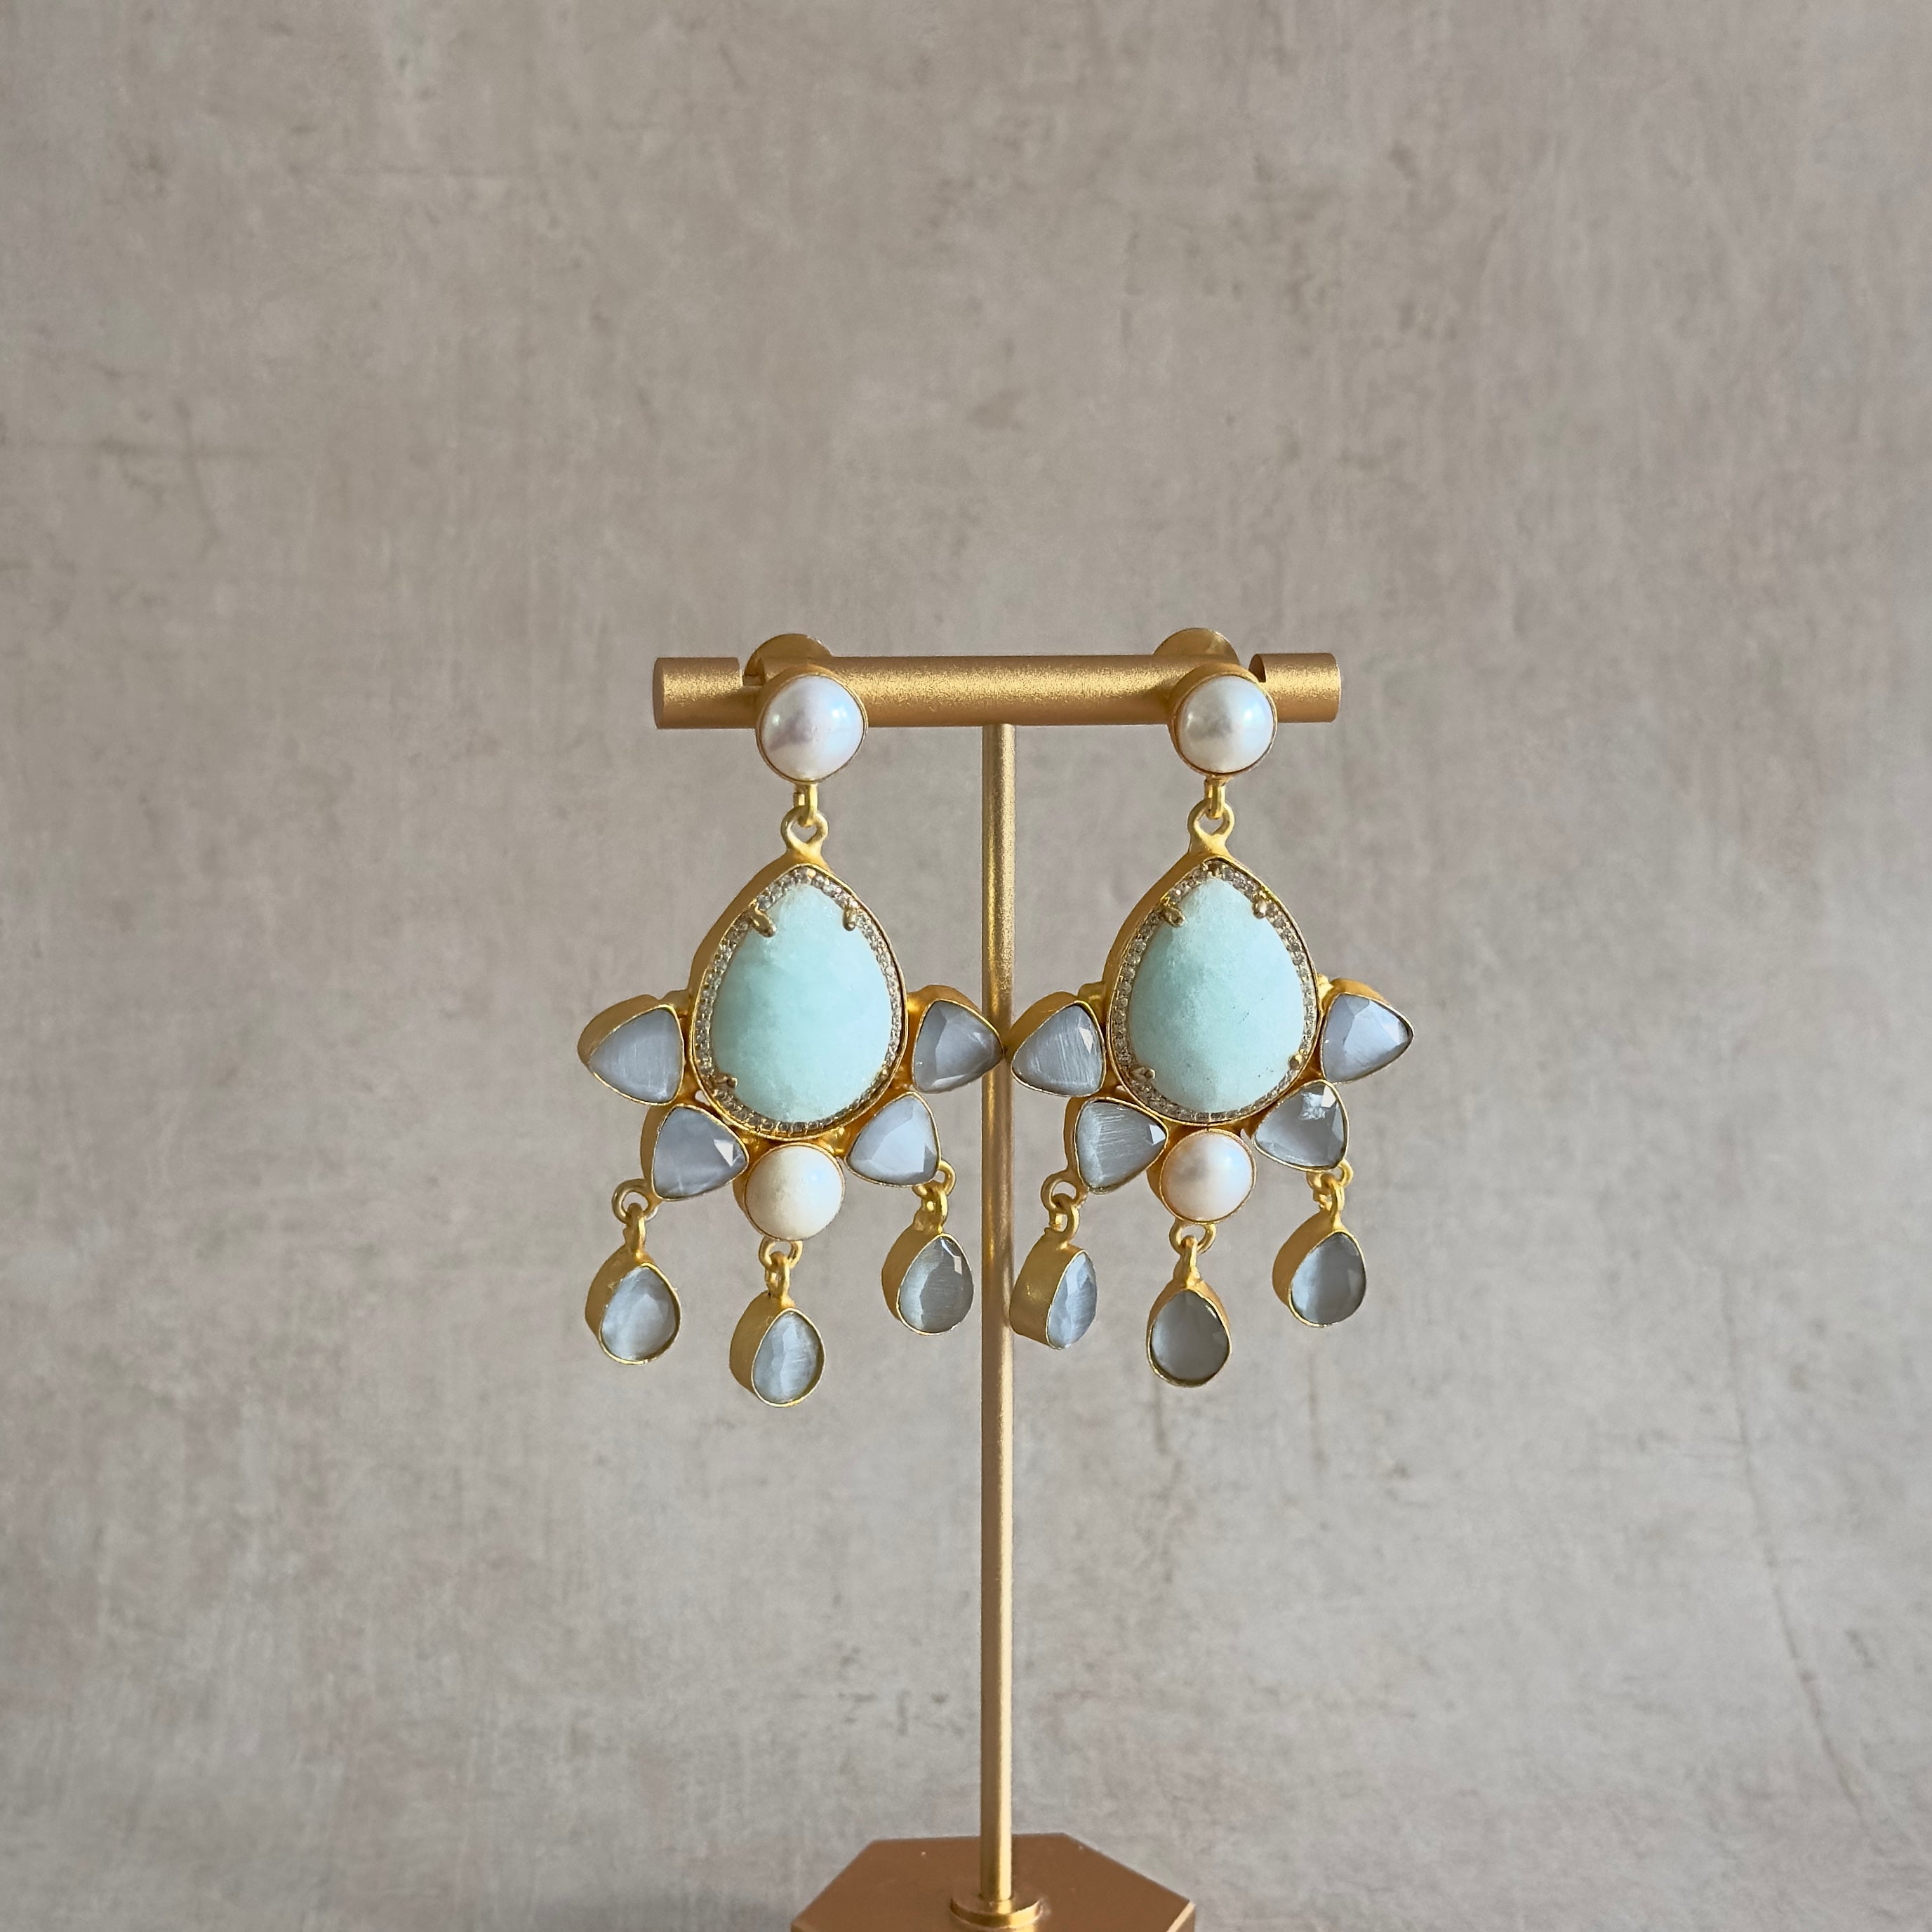 Exude elegance and charm with our Nara Grey Drop Earrings. Featuring stunning hues of jade and grey, these earrings are accented with lustrous pearls for a truly glamo